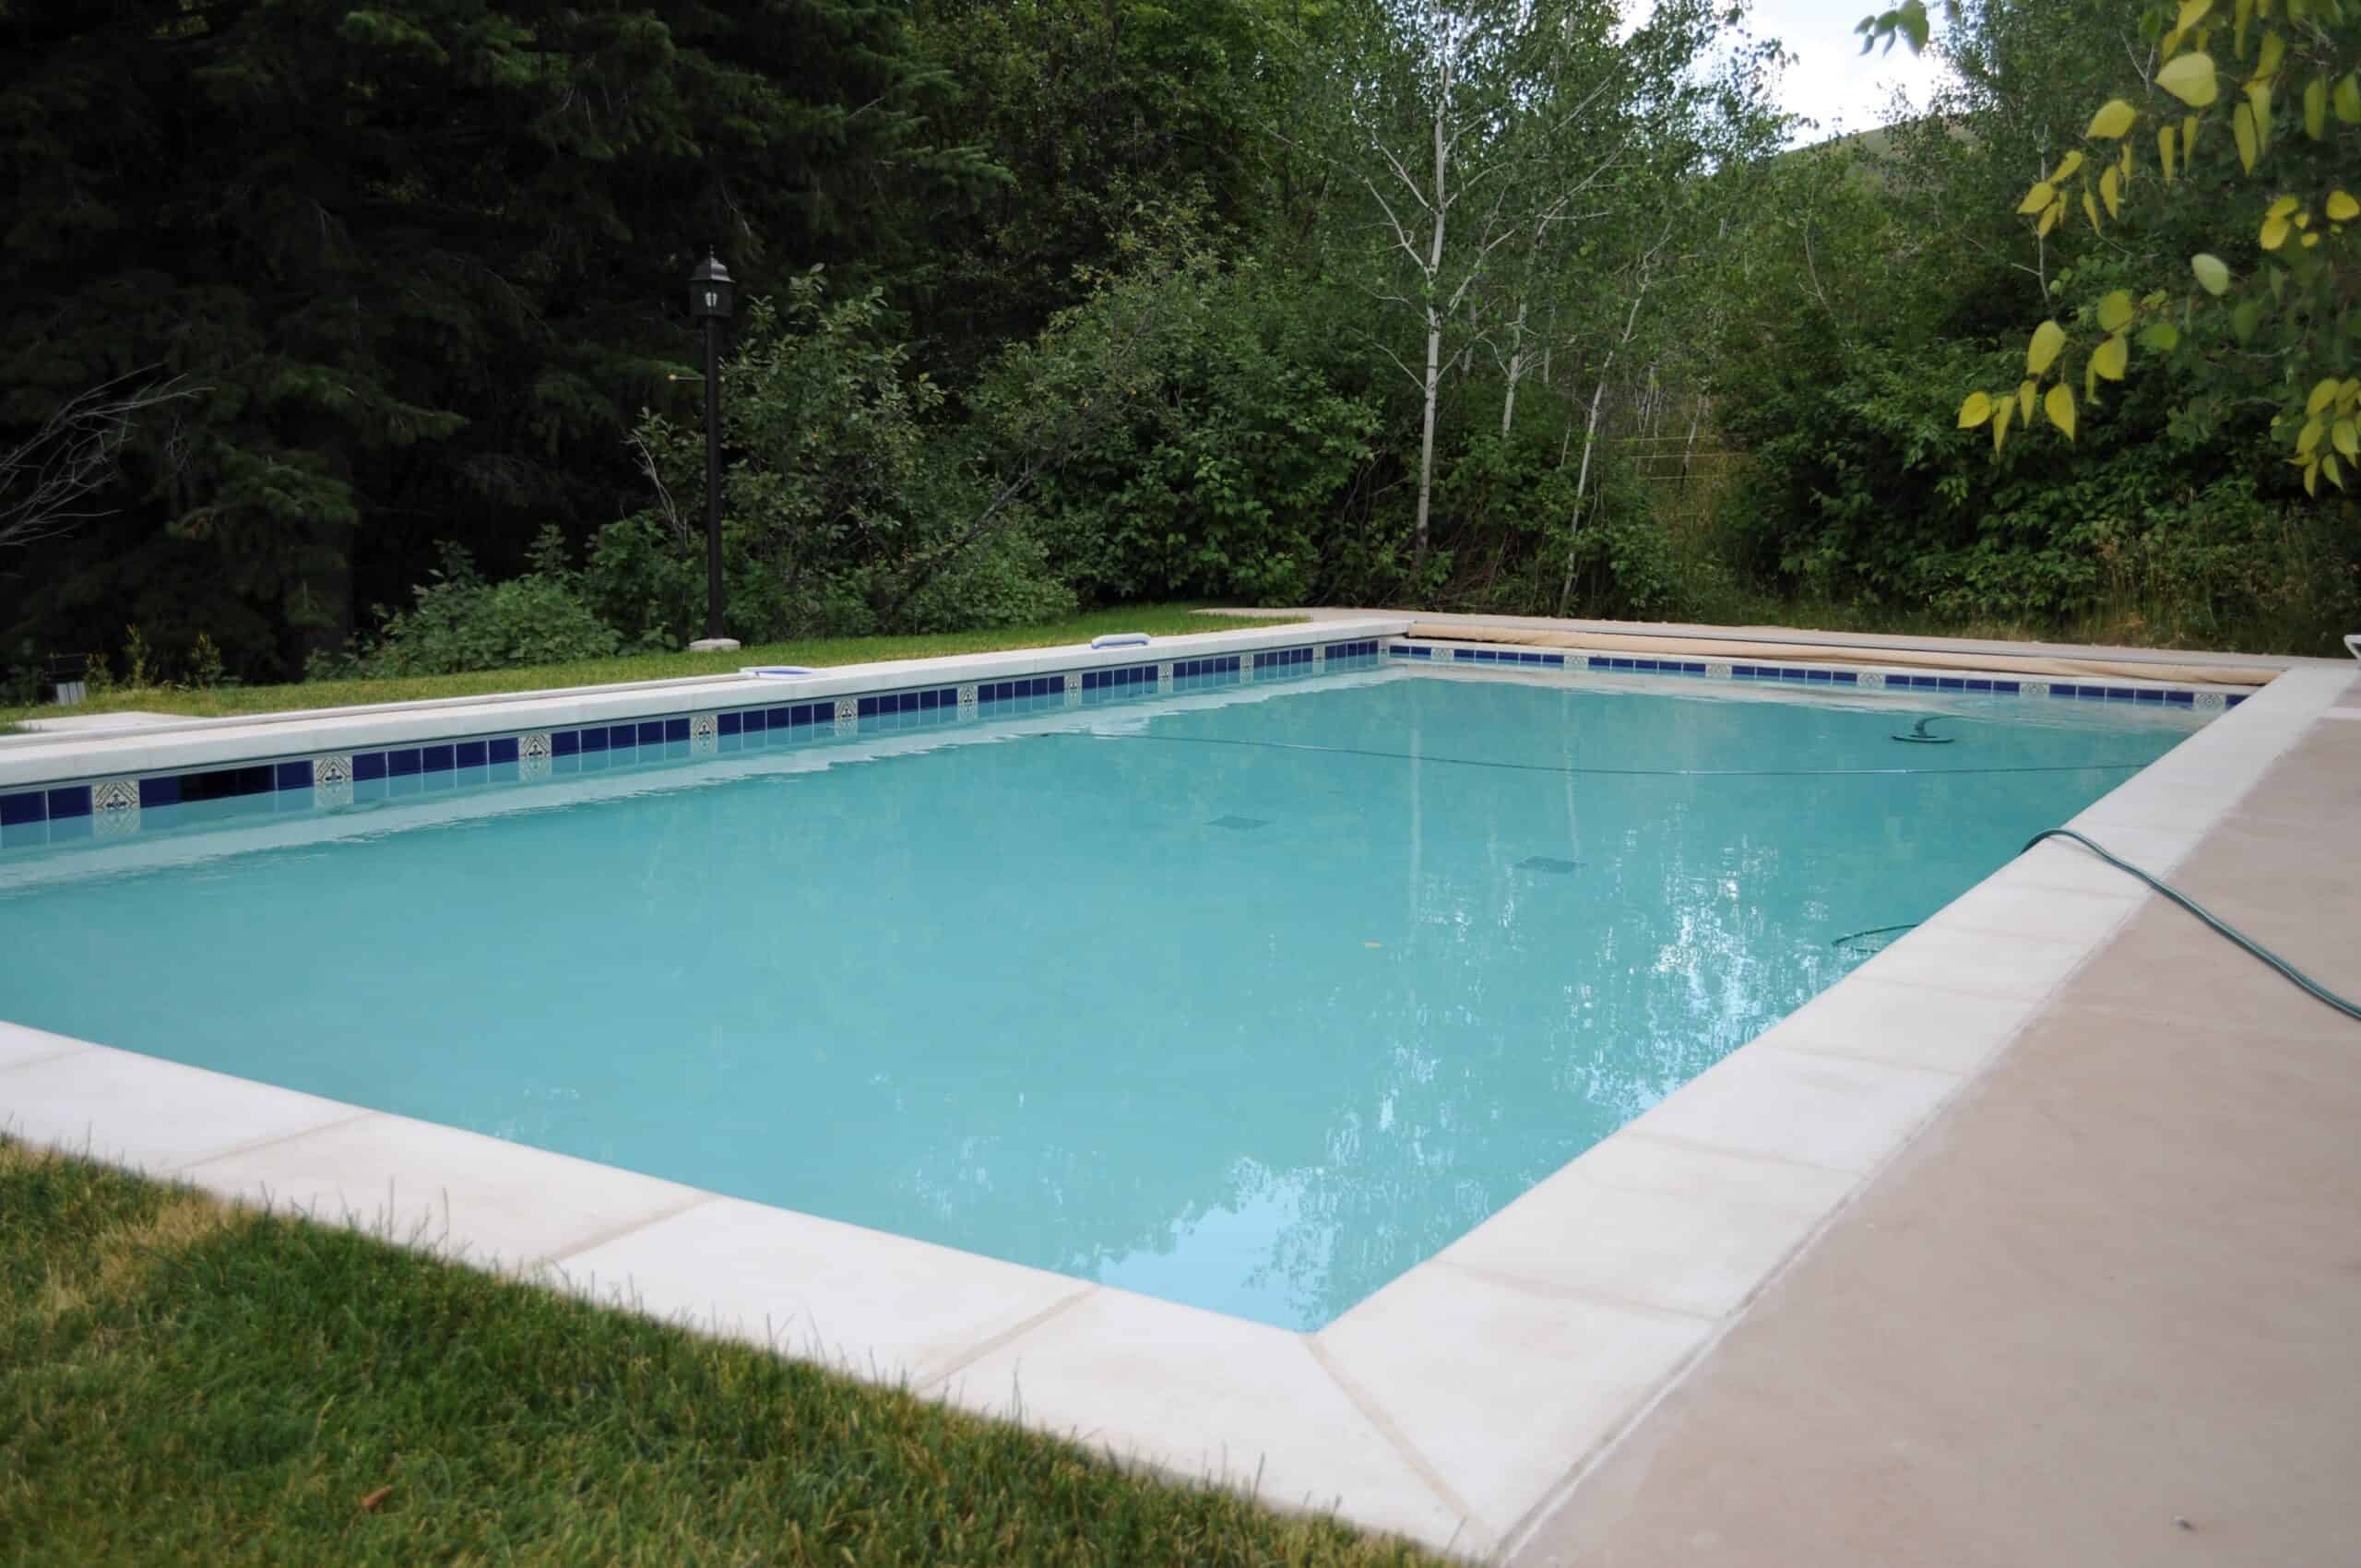 An in ground swimming pool sits nestled in lush, green woods awaiting its pool cover to be installed before it snows.